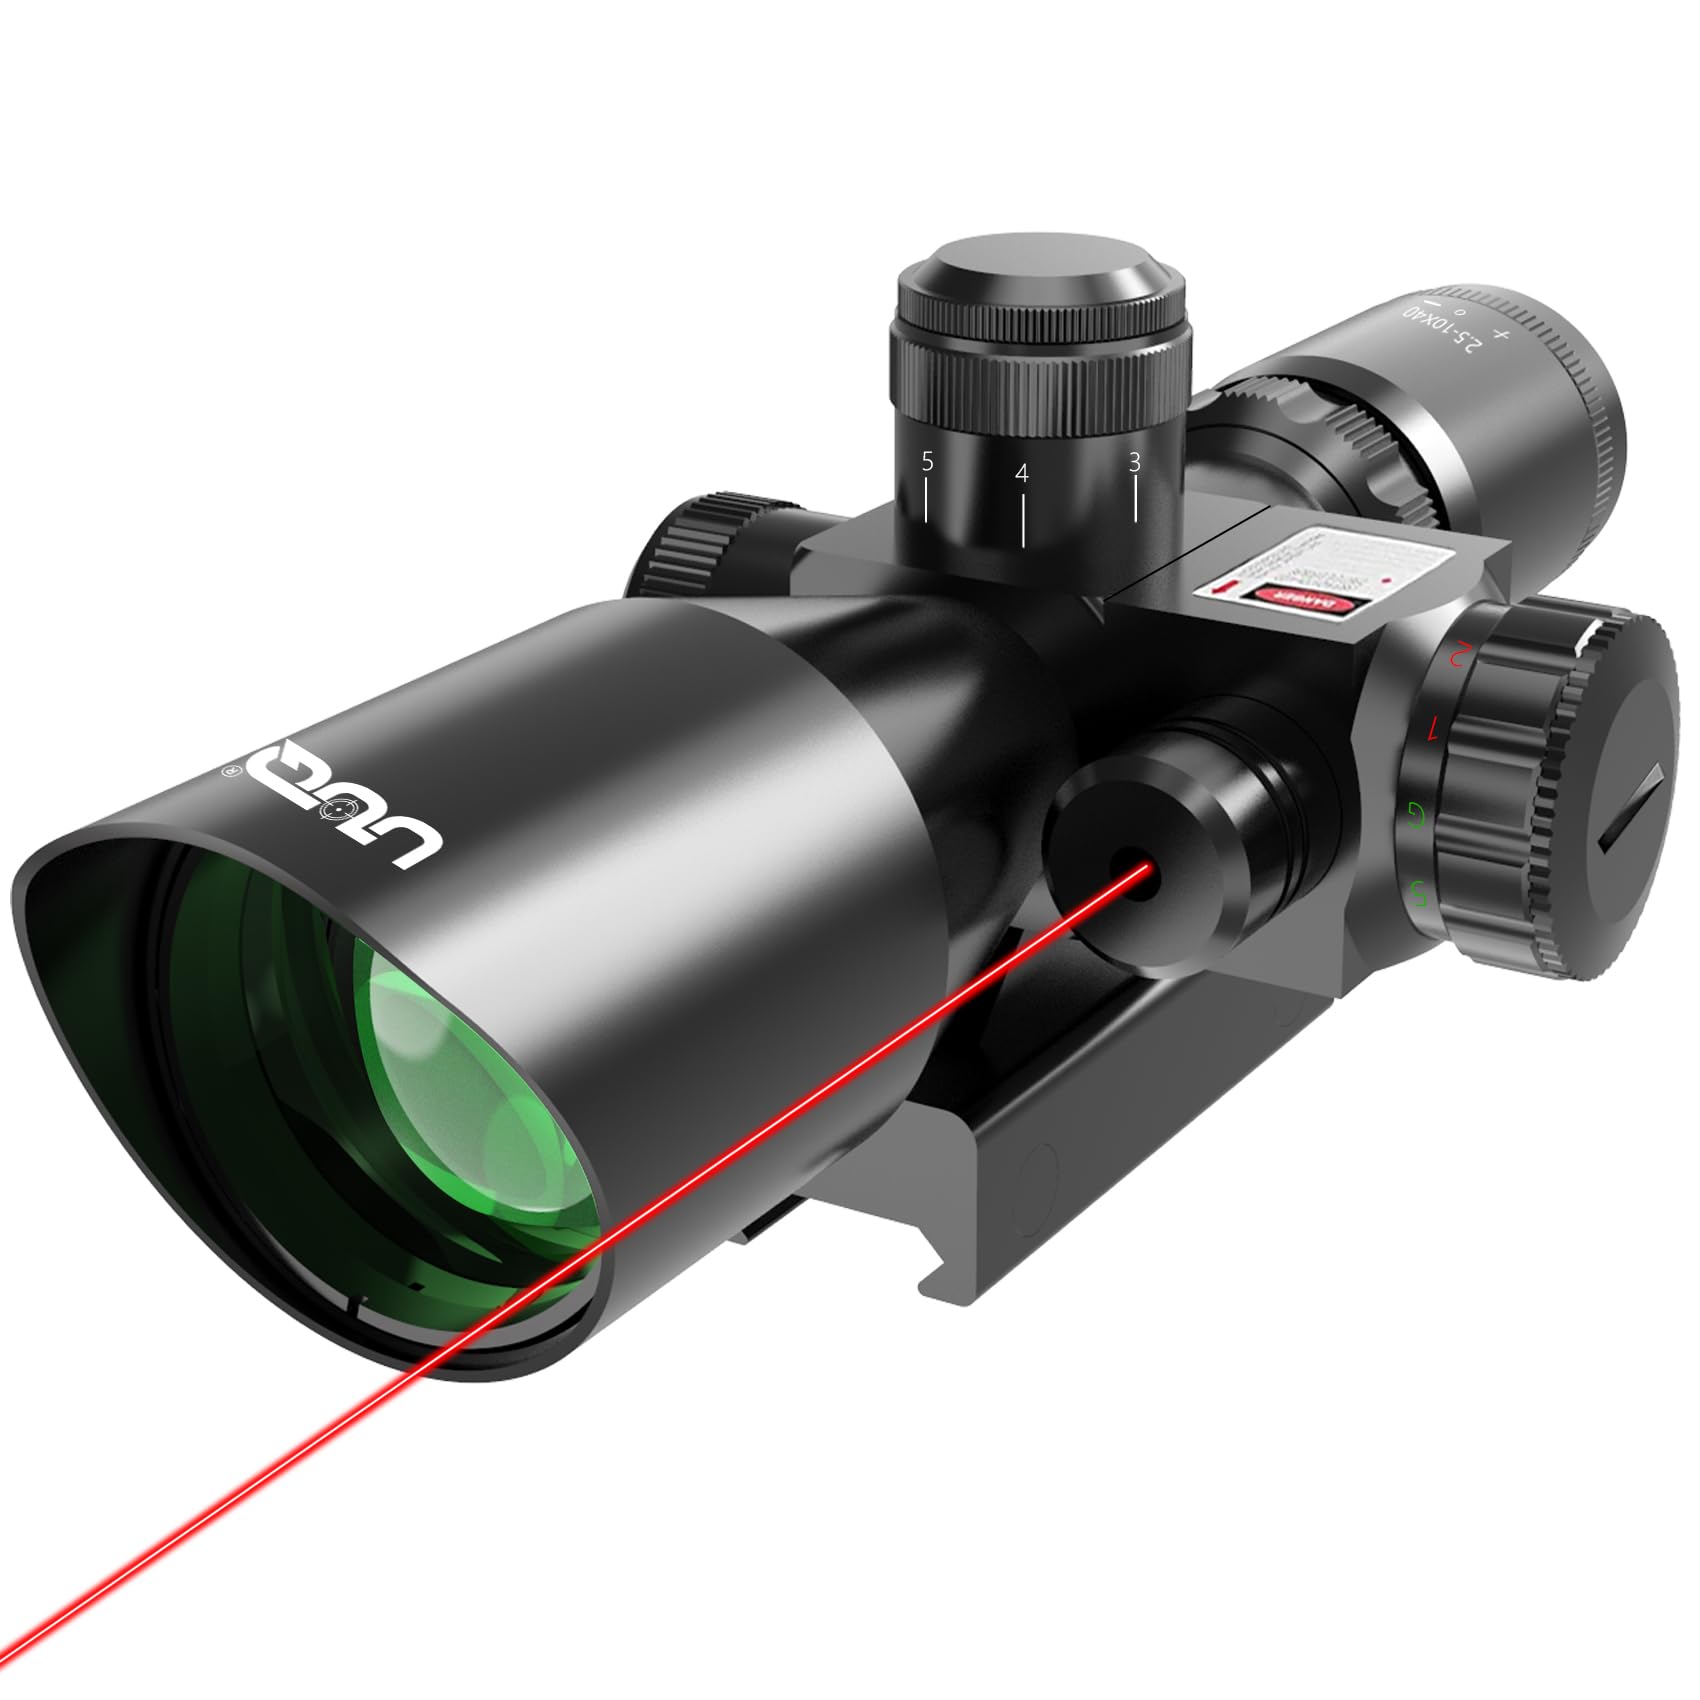 UUQ 2.5-10x40ER Rifle Scope with Red/Green Illuminated Mil-dot with Red Laser Combo- Green Lens Color, Tactical Scope for Gun Air Hunting Rifles, Includes Free 20mm Mount